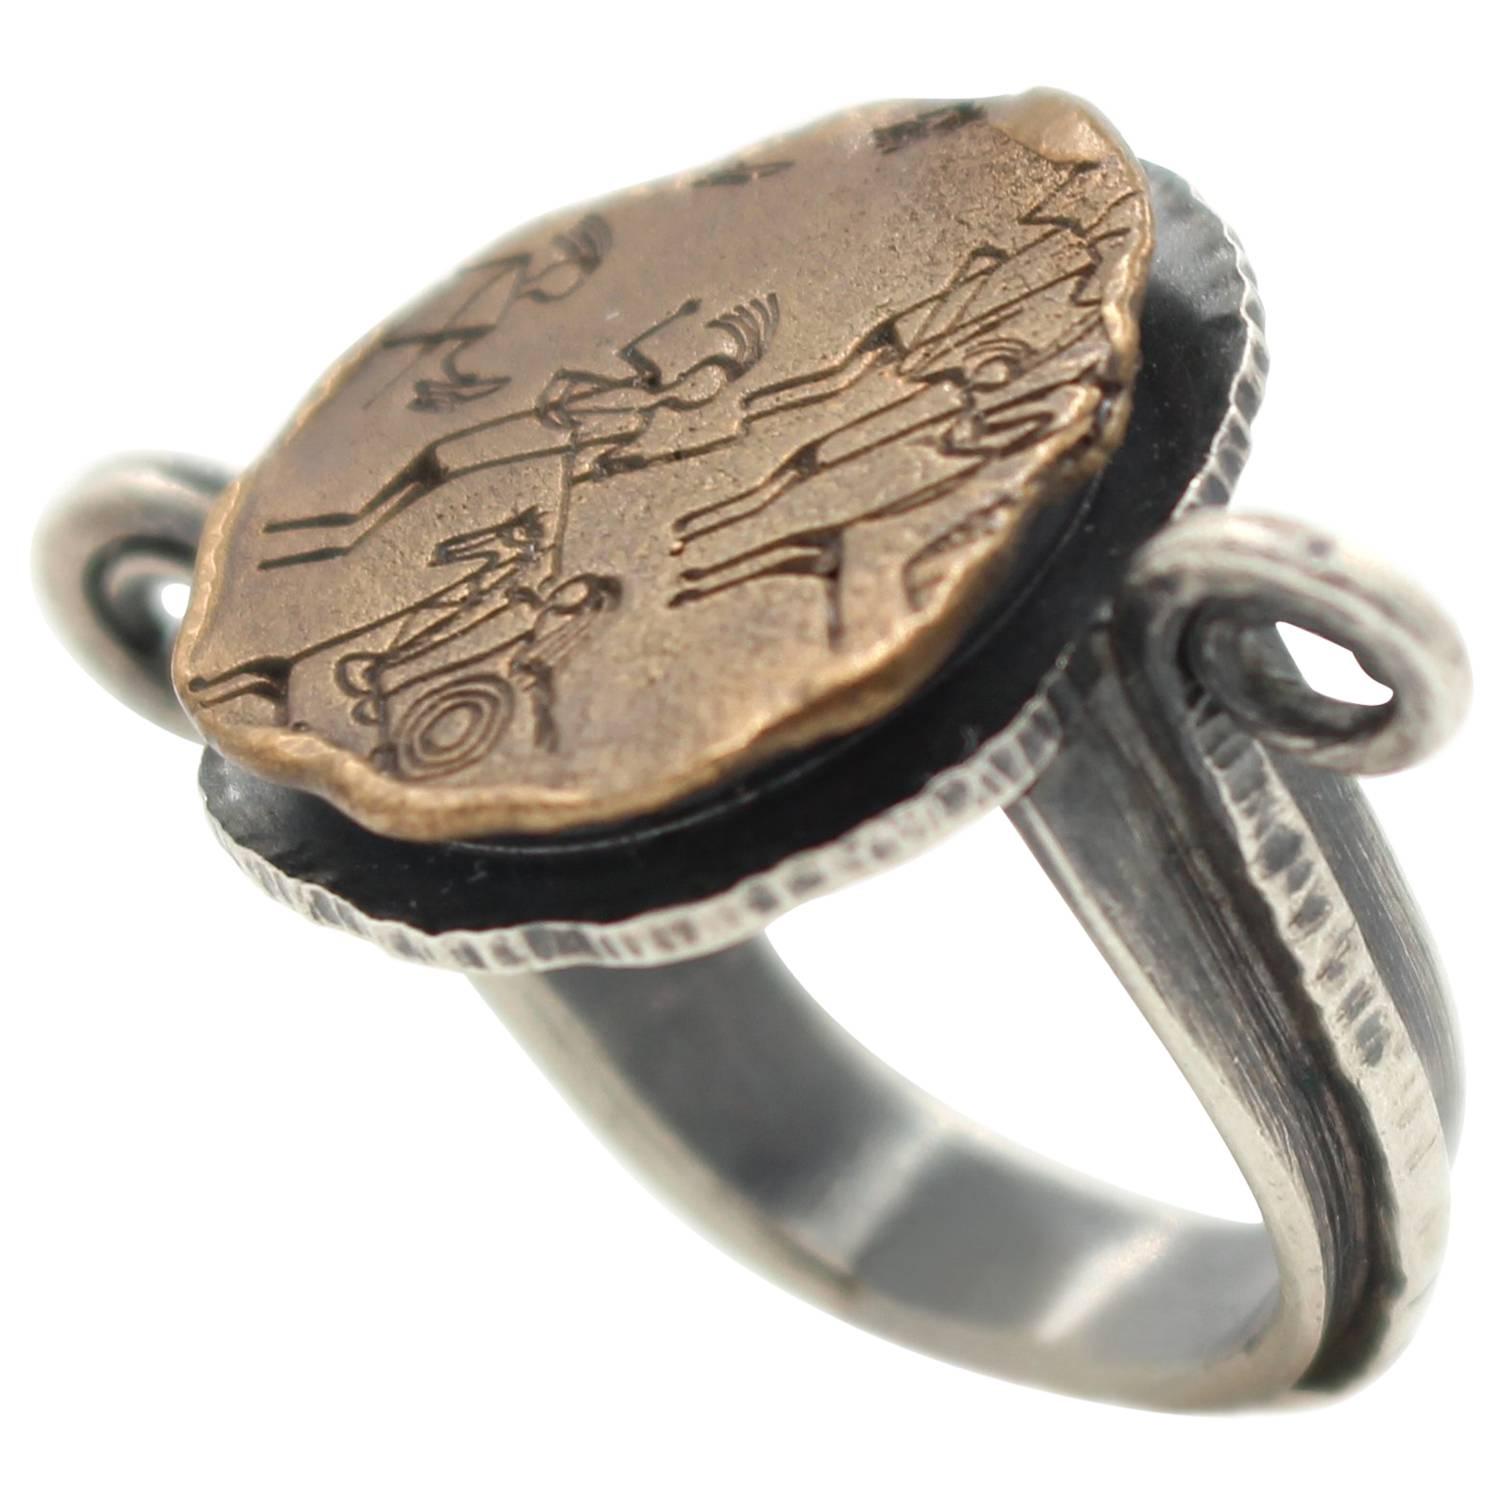 Petroglyph Ring For Sale